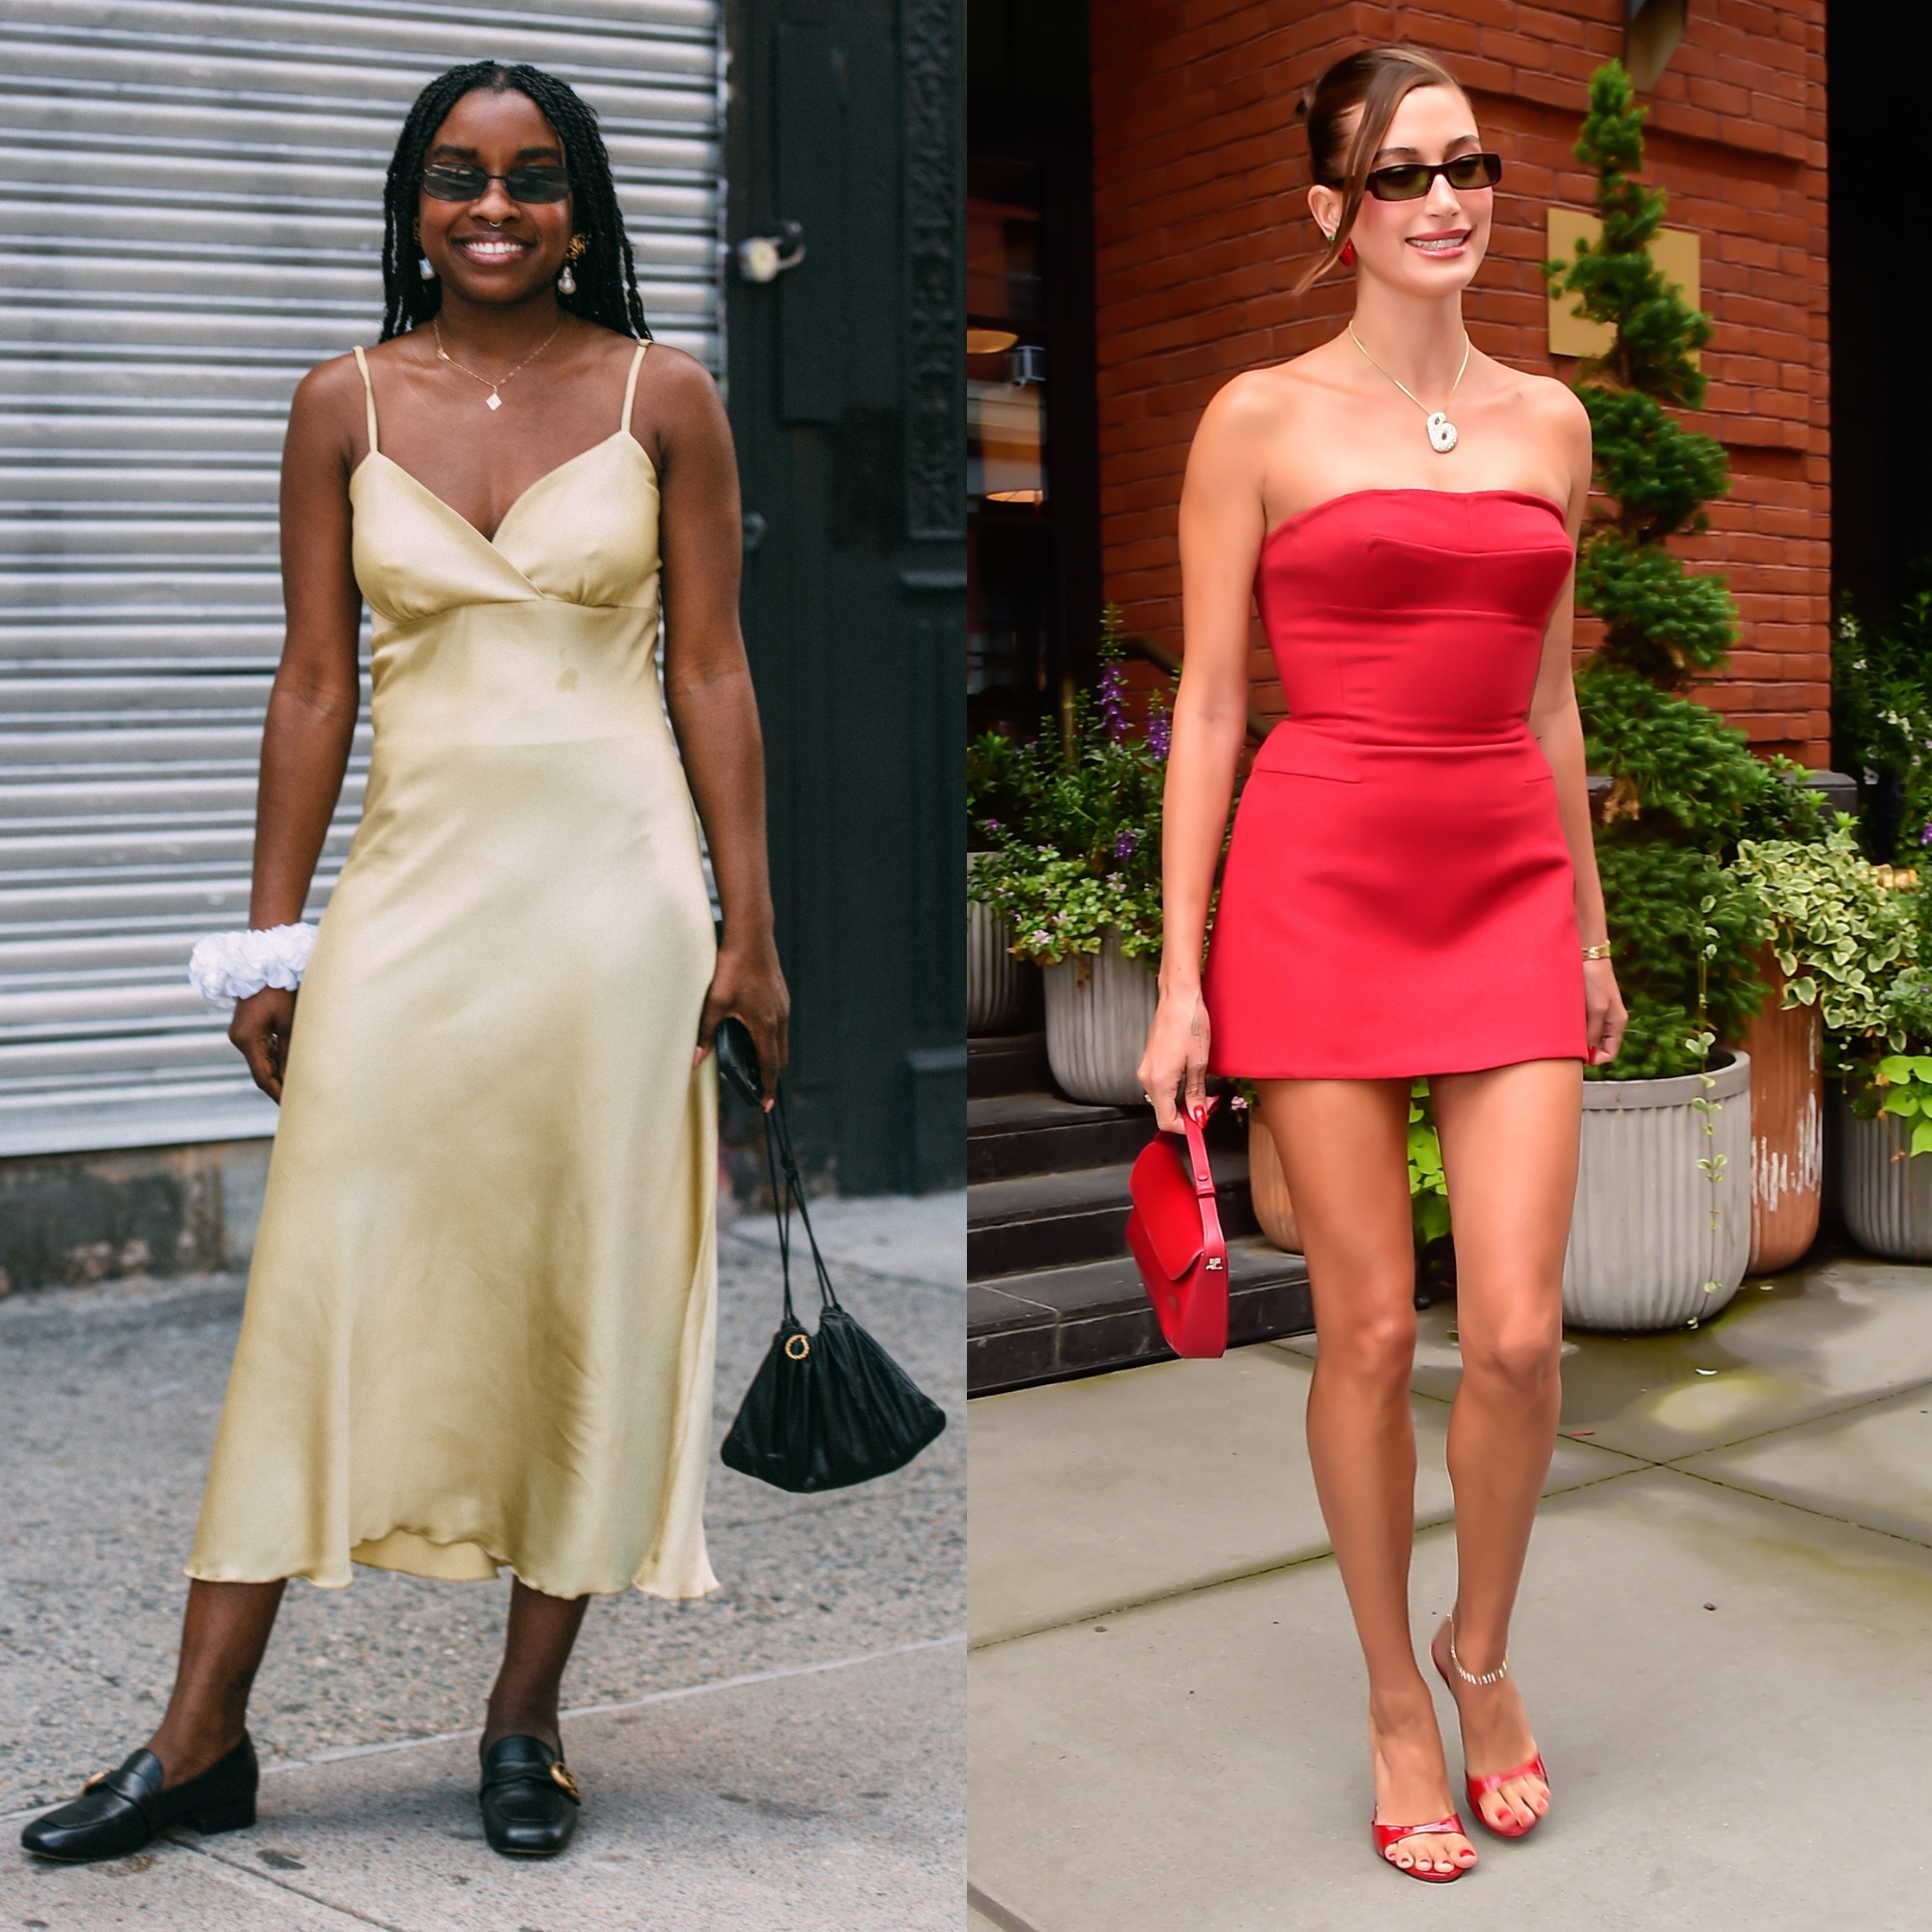 Master Summer Styling With These Expert Tips From Team NET-A-PORTER